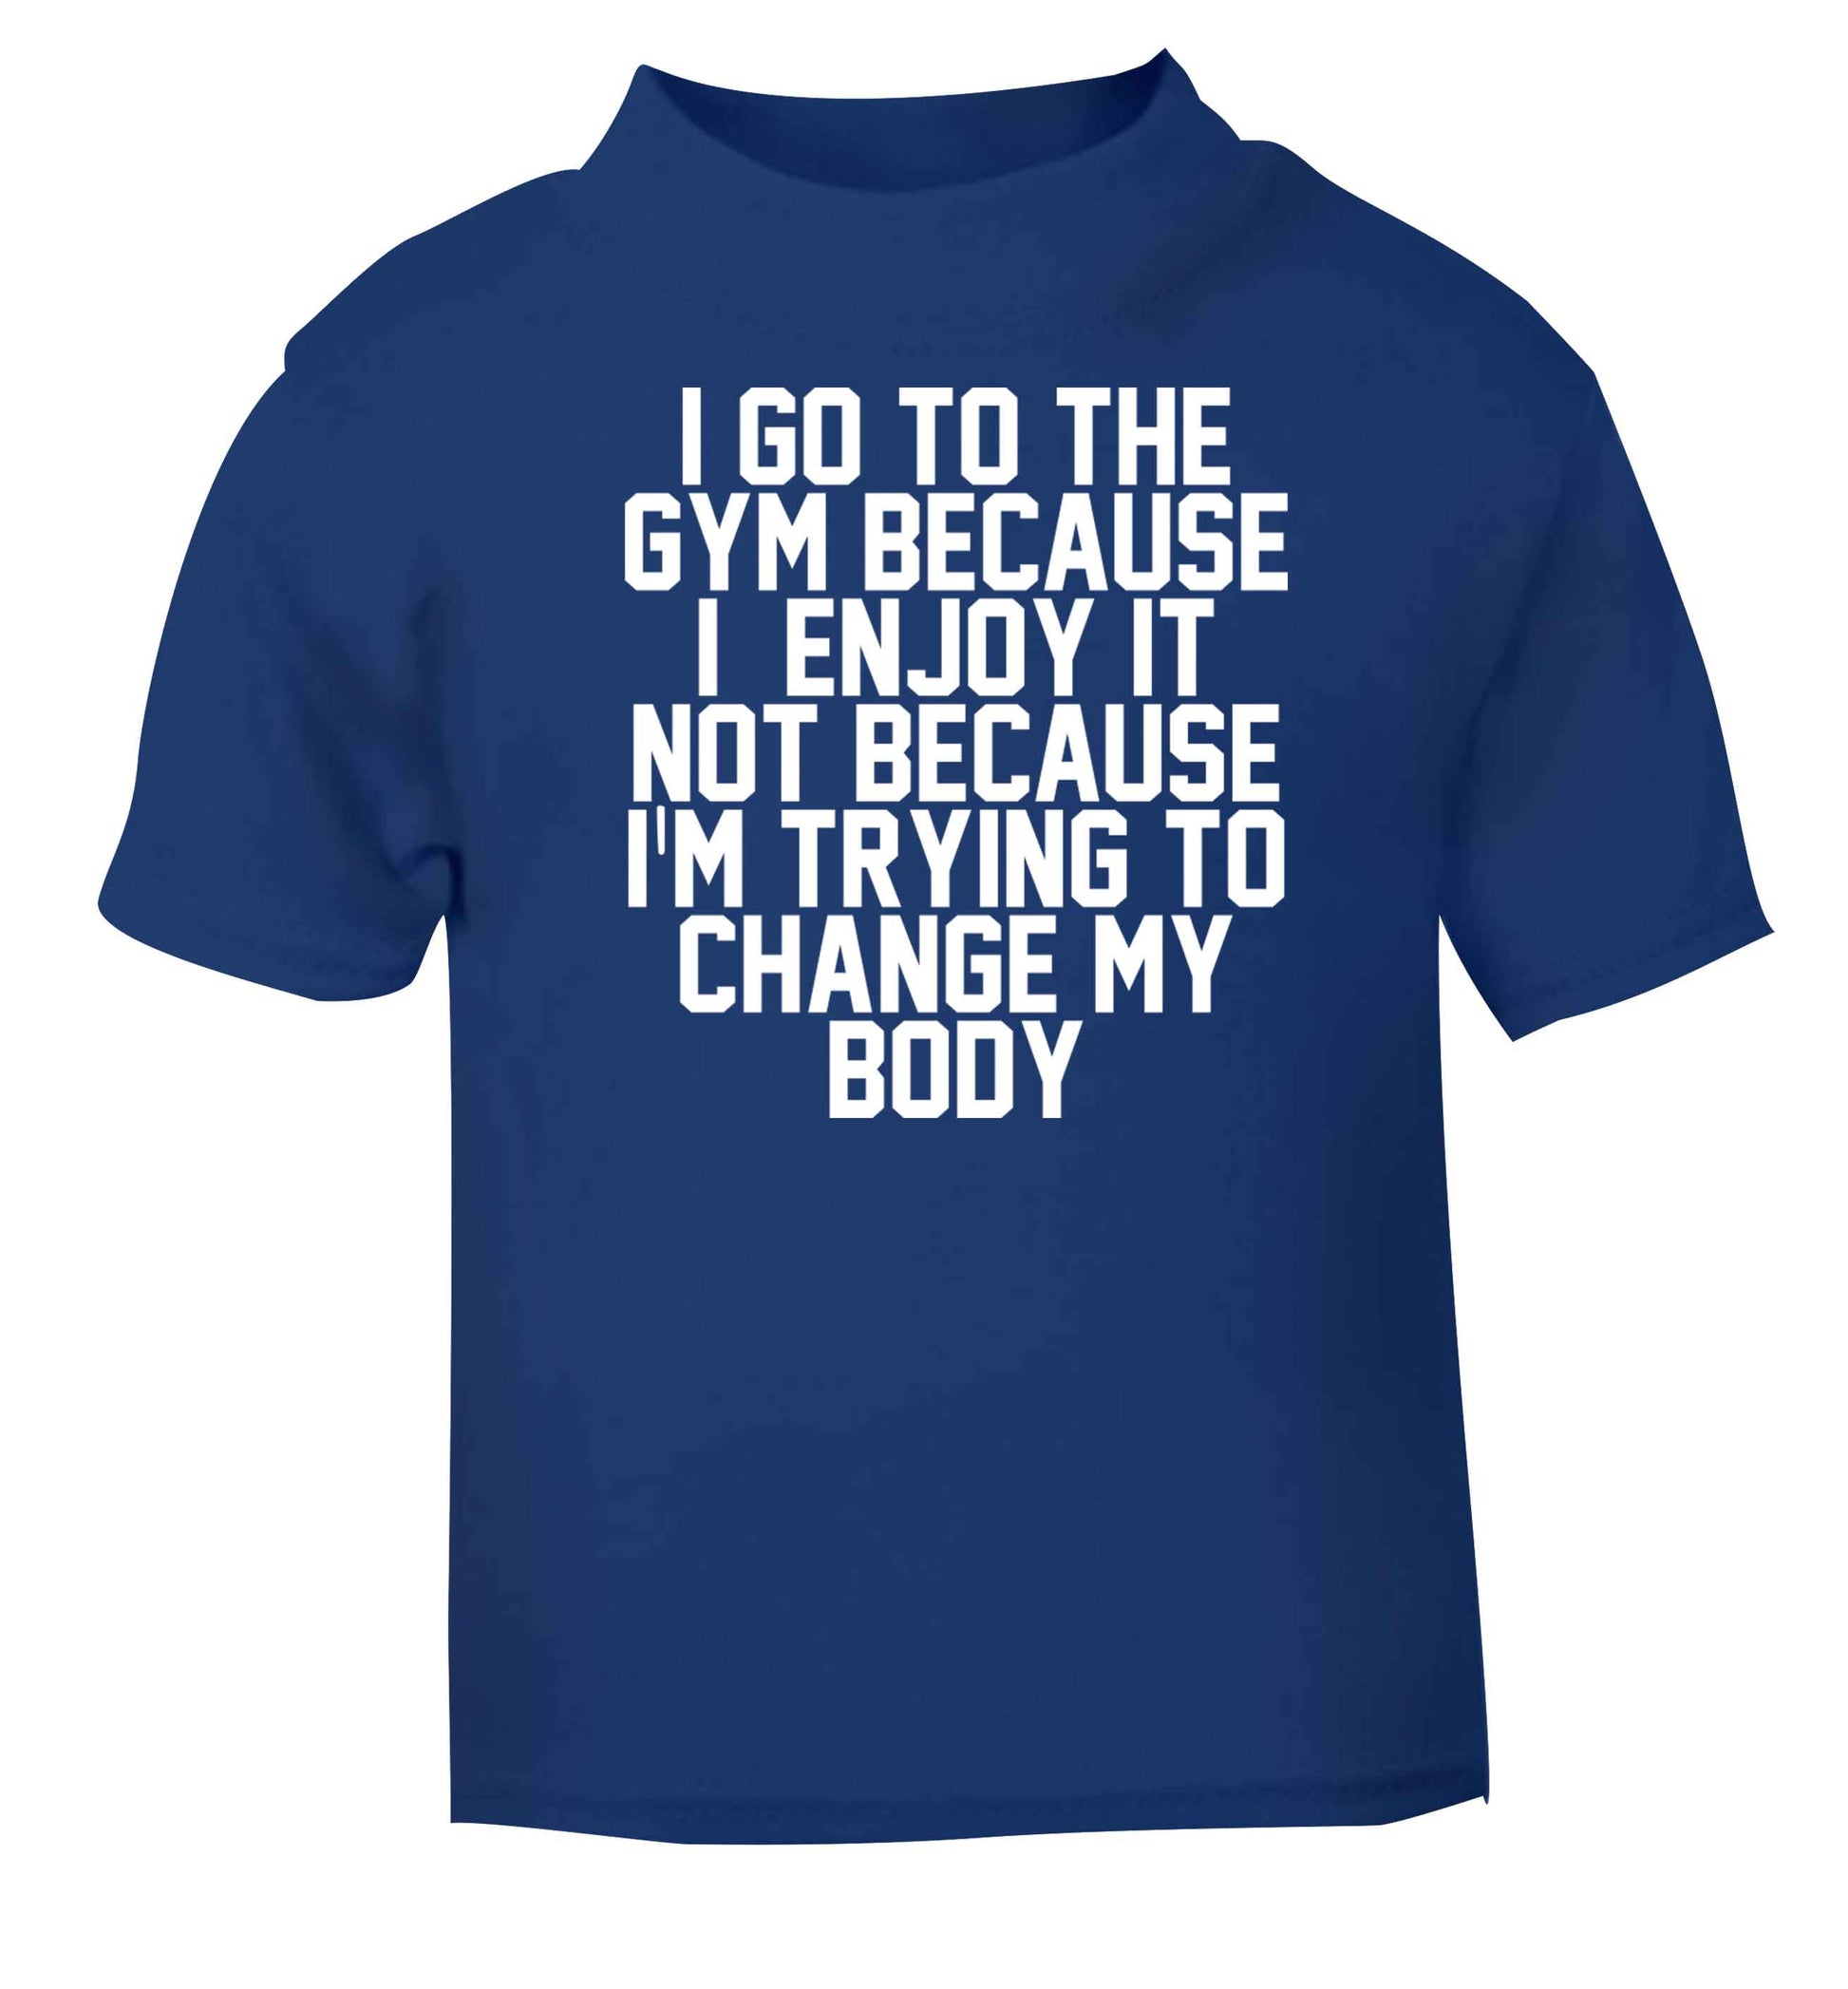 I go to the gym because I enjoy it not because I'm trying to change my body blue baby toddler Tshirt 2 Years